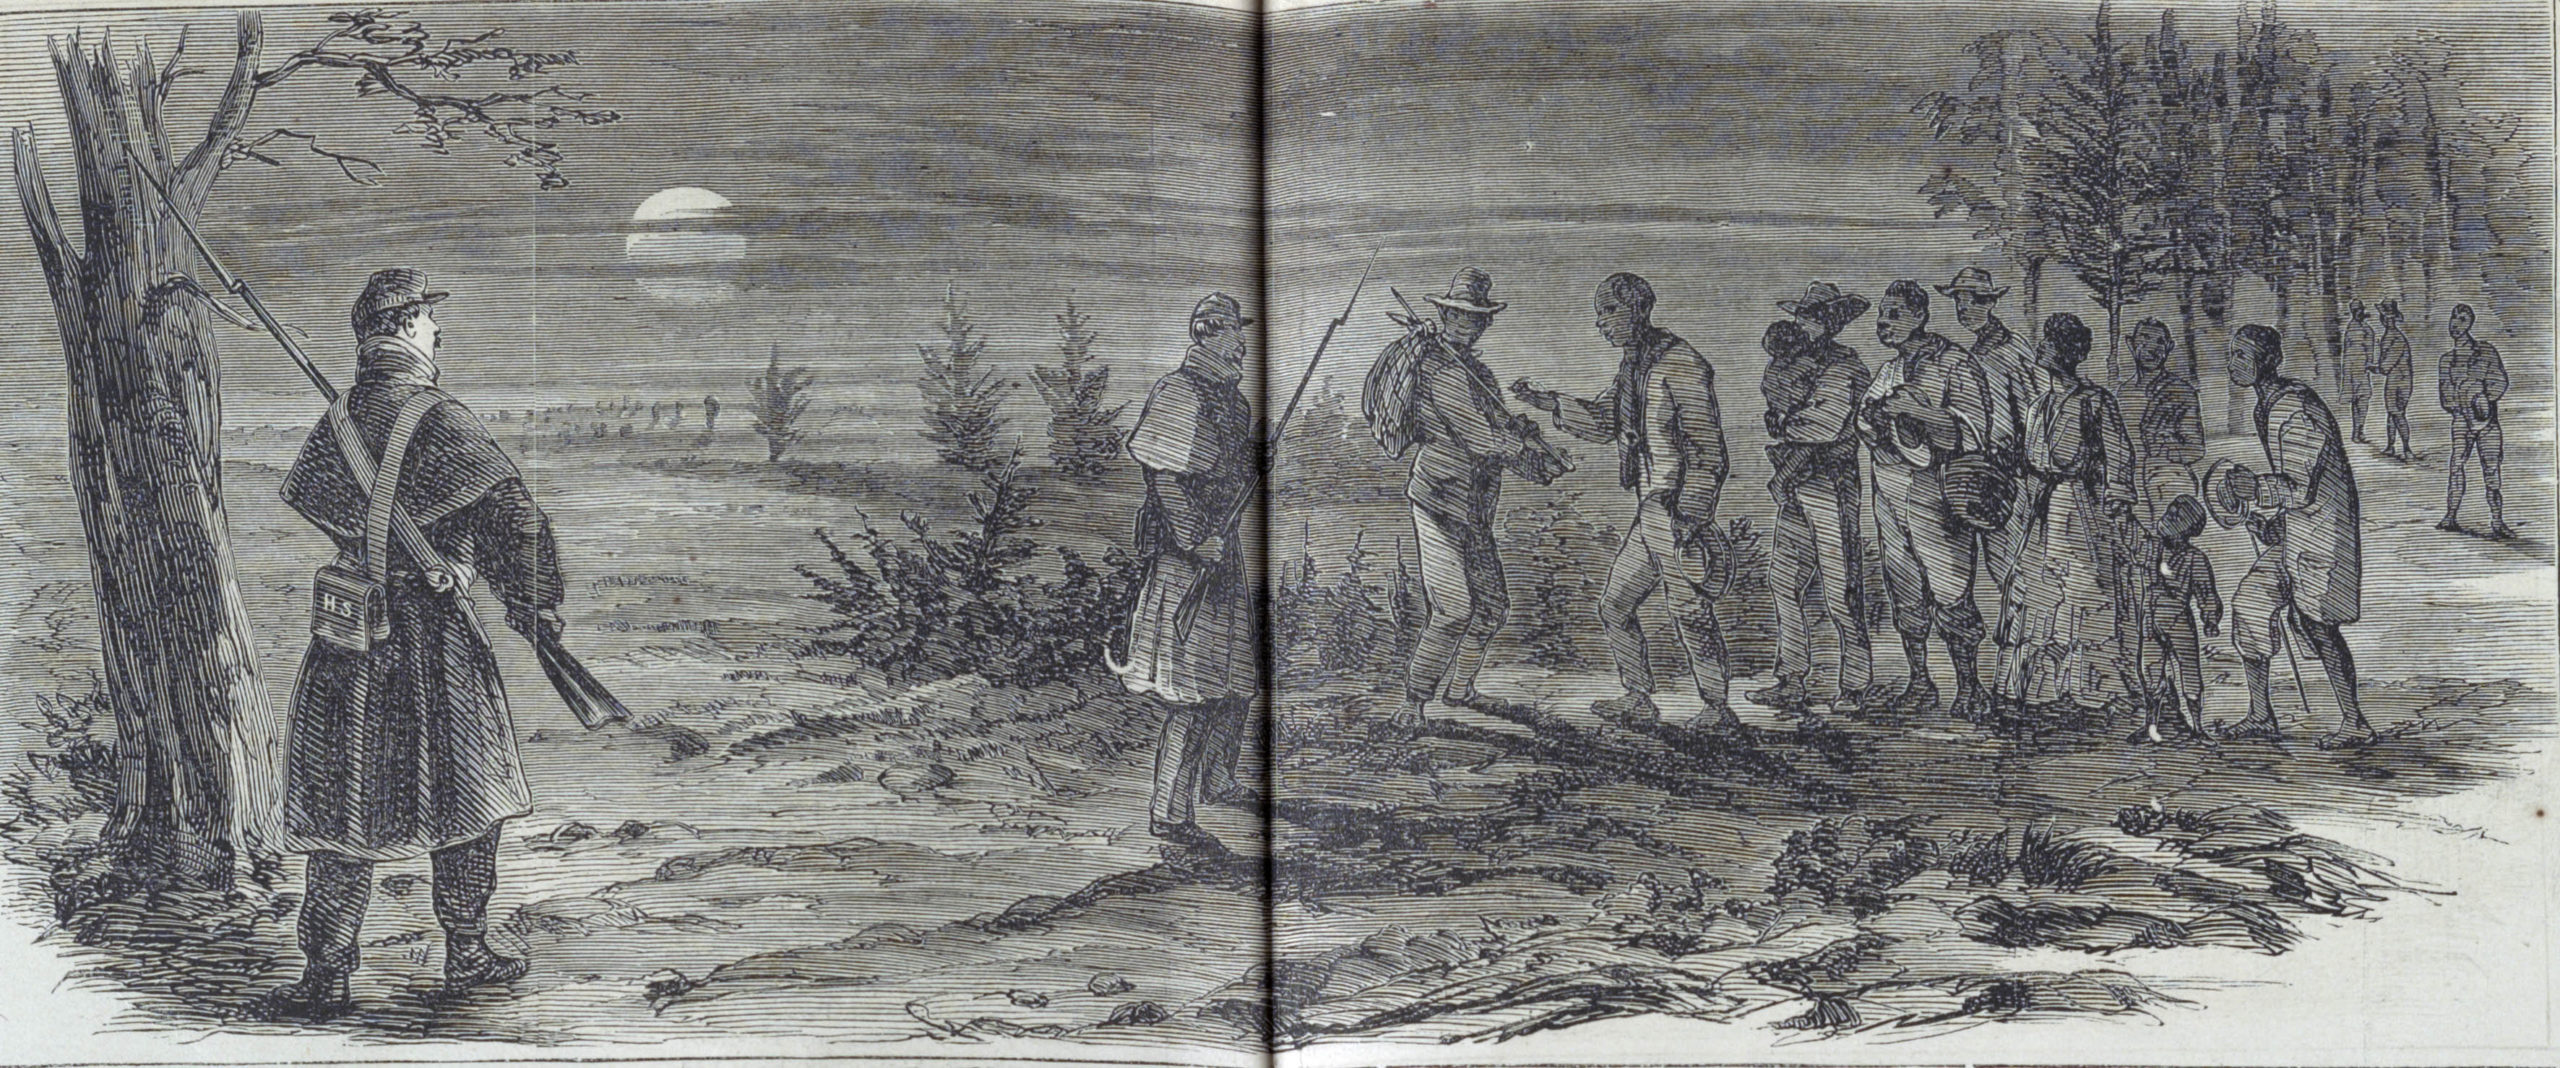 Refugees meeting U.S. Army officers at night and requesting asylum (detail), "Stampede among the Negroes in Virginia—their arrival at Fortress Monroe / from sketches by our Special Artist in Fortress Monroe," <em>Frank Leslie’s Illustrated Newspaper</em>, June 8, 1861, pp. 56–57, wood engraving, 40.4 x 54.3 cm (<a href="https://www.loc.gov/pictures/item/99614015/" target="_blank" rel="noopener">Library of Congress</a>)